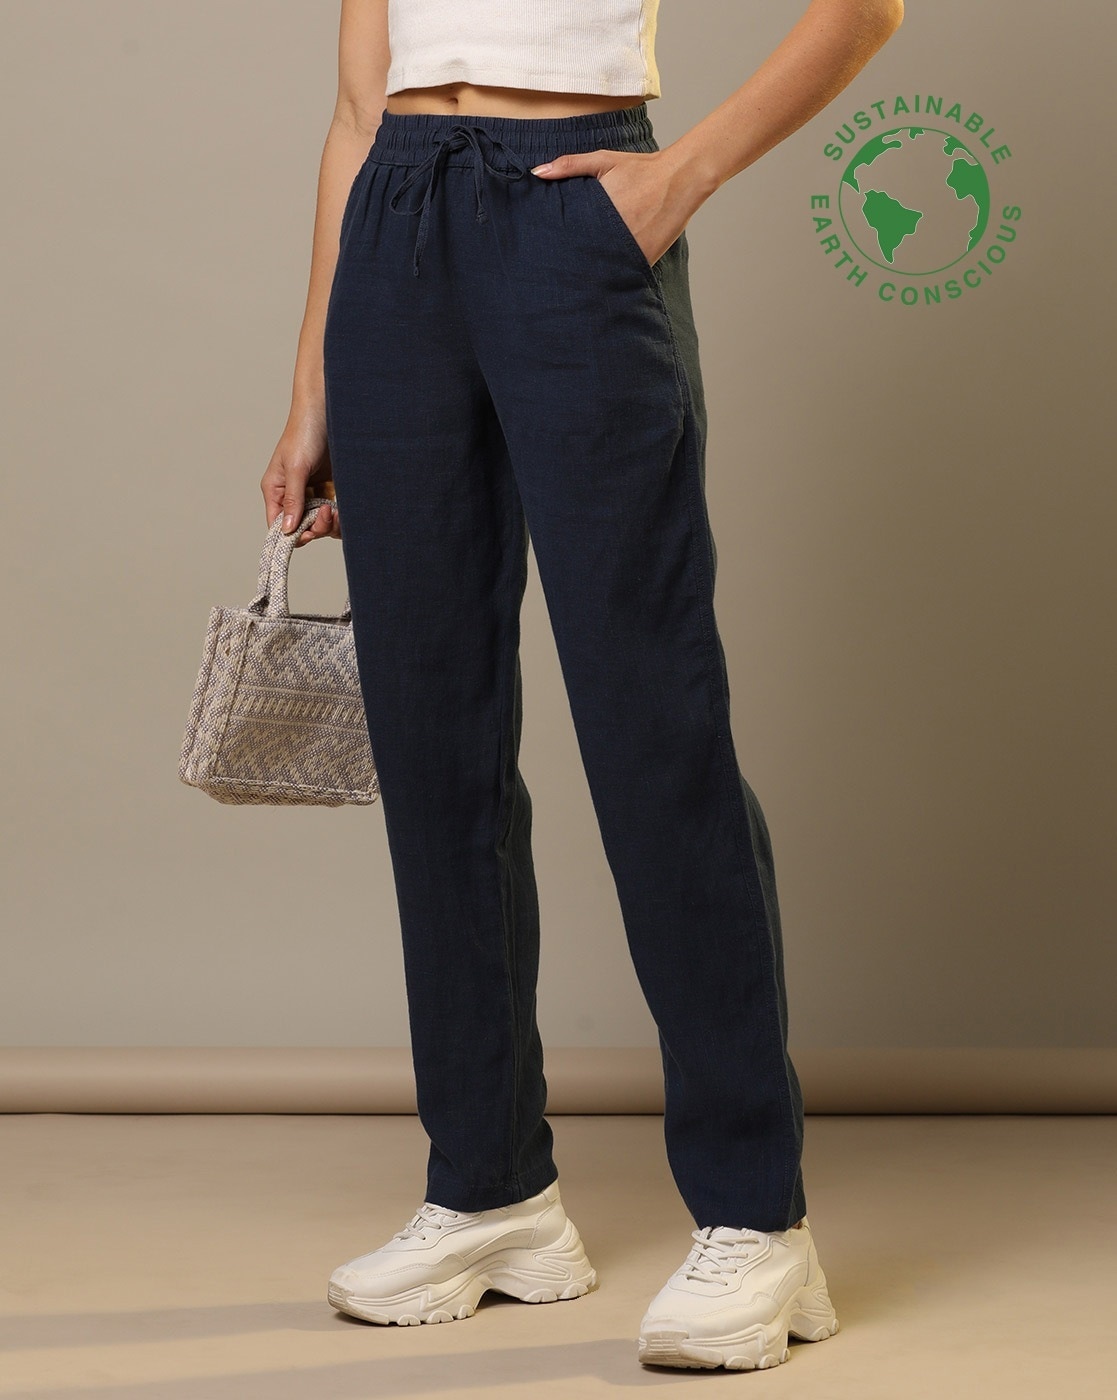 Midnight Blue Corduroy Trousers -Stancliffe Flat-Front in 8-Wale Cotton by  Fort Belvedere